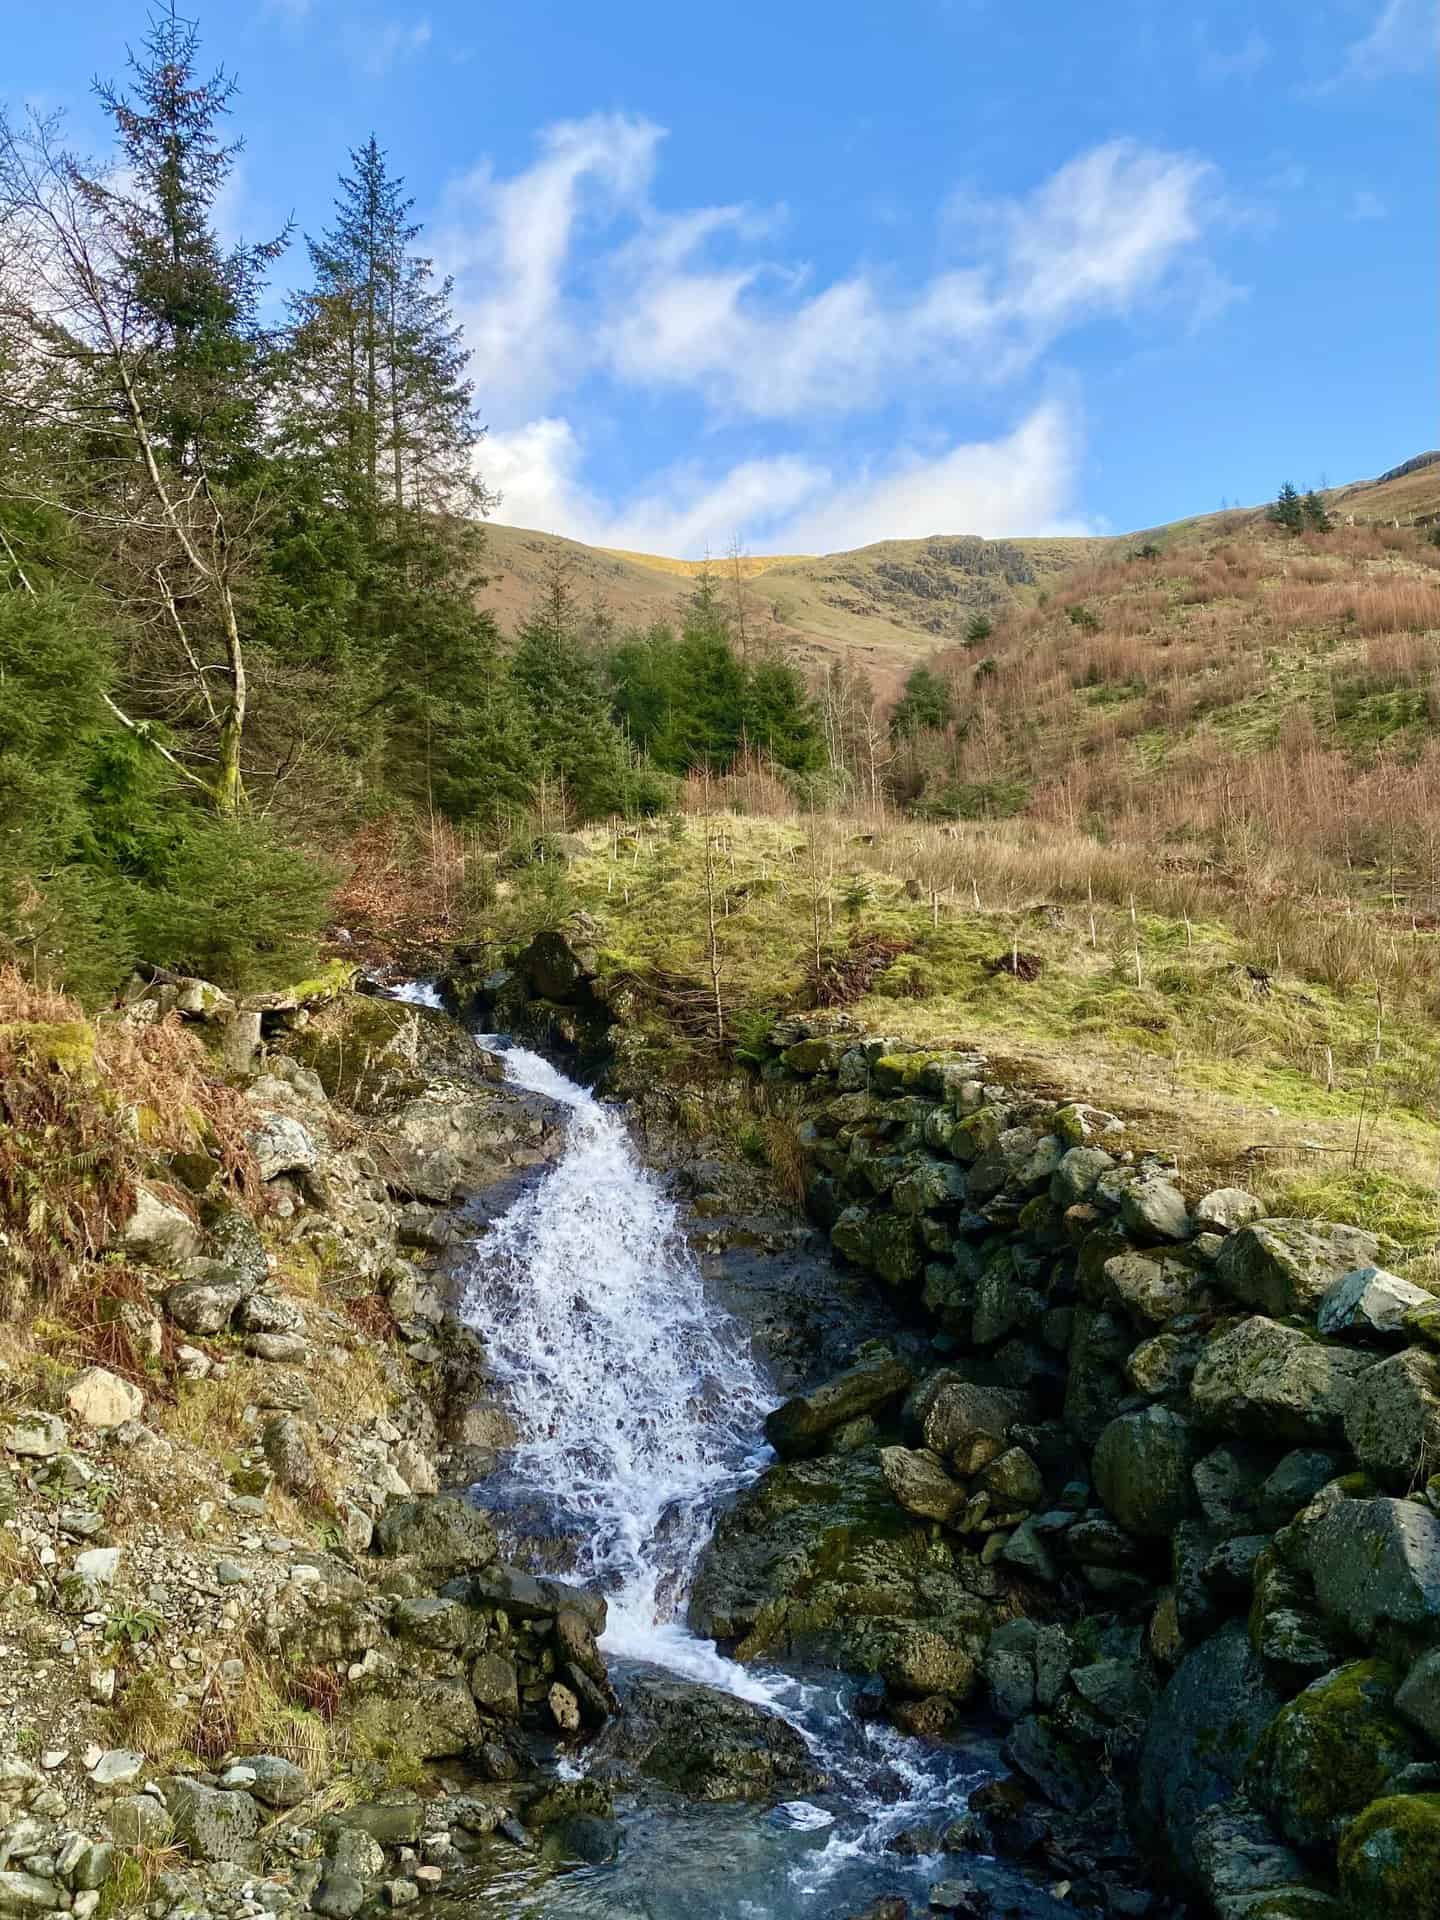 Whelpside Gill, just a few metres north of Comb Gill. This stream descends through the valley between Whelp Side and Middle Tongue and continues its flow into Thirlmere.